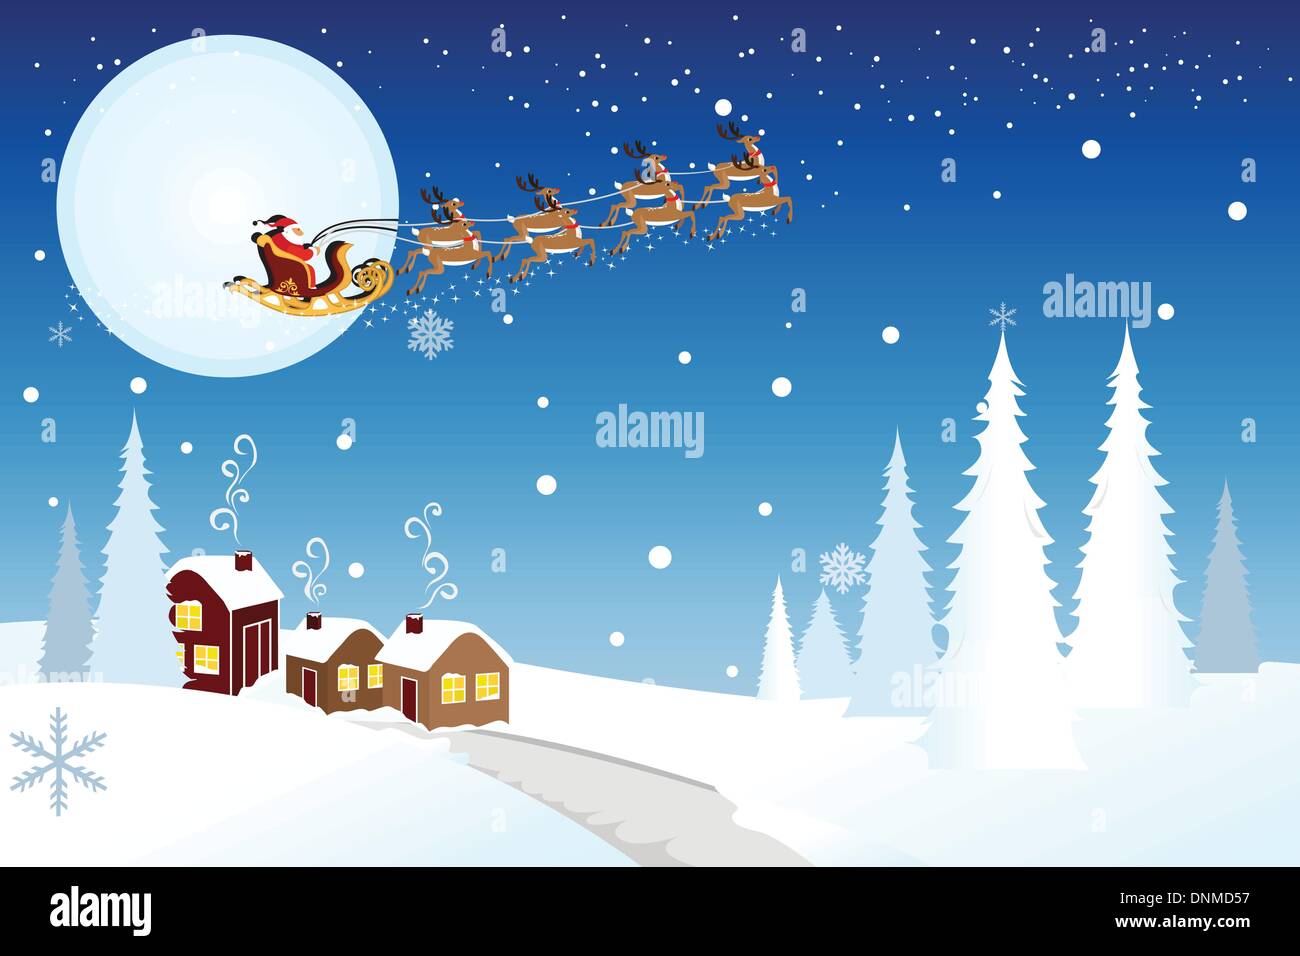 Vector illustration of Santa Claus riding the the sleigh pulled by reindeers in the middle of winter night Stock Vector